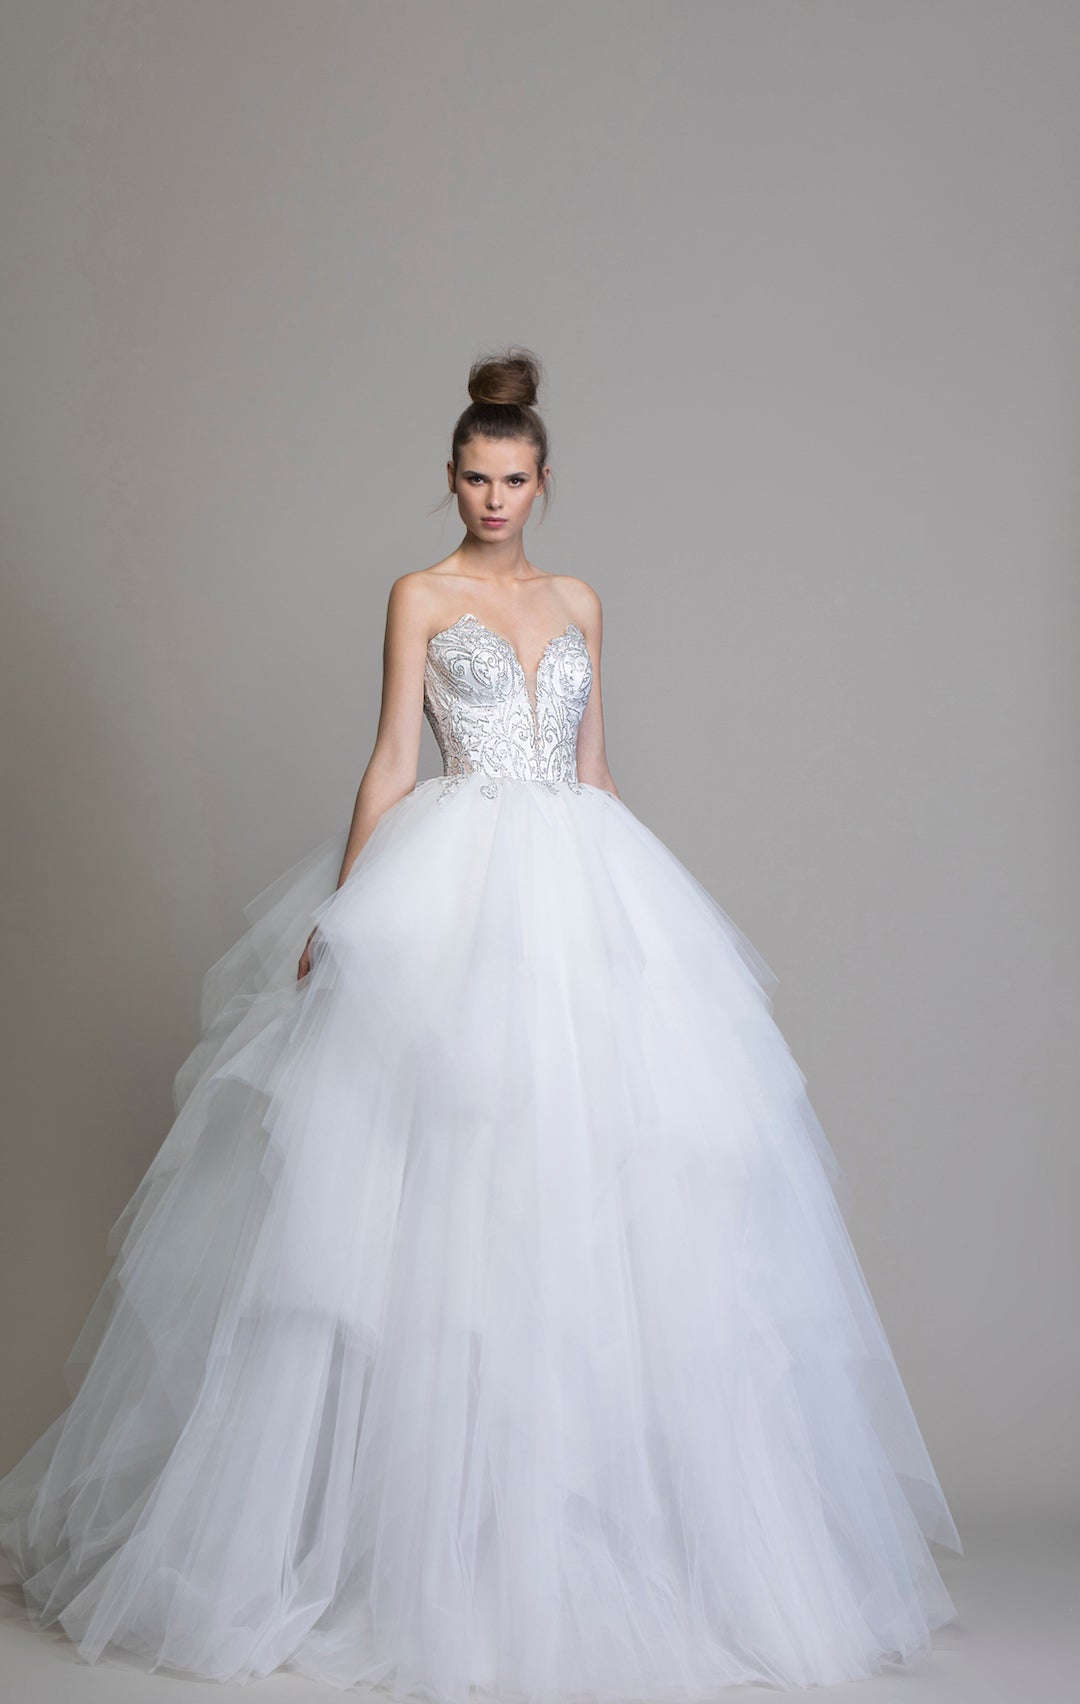 Pnina Tornai's new LOVE 2020 Collection is out! This is style 14757